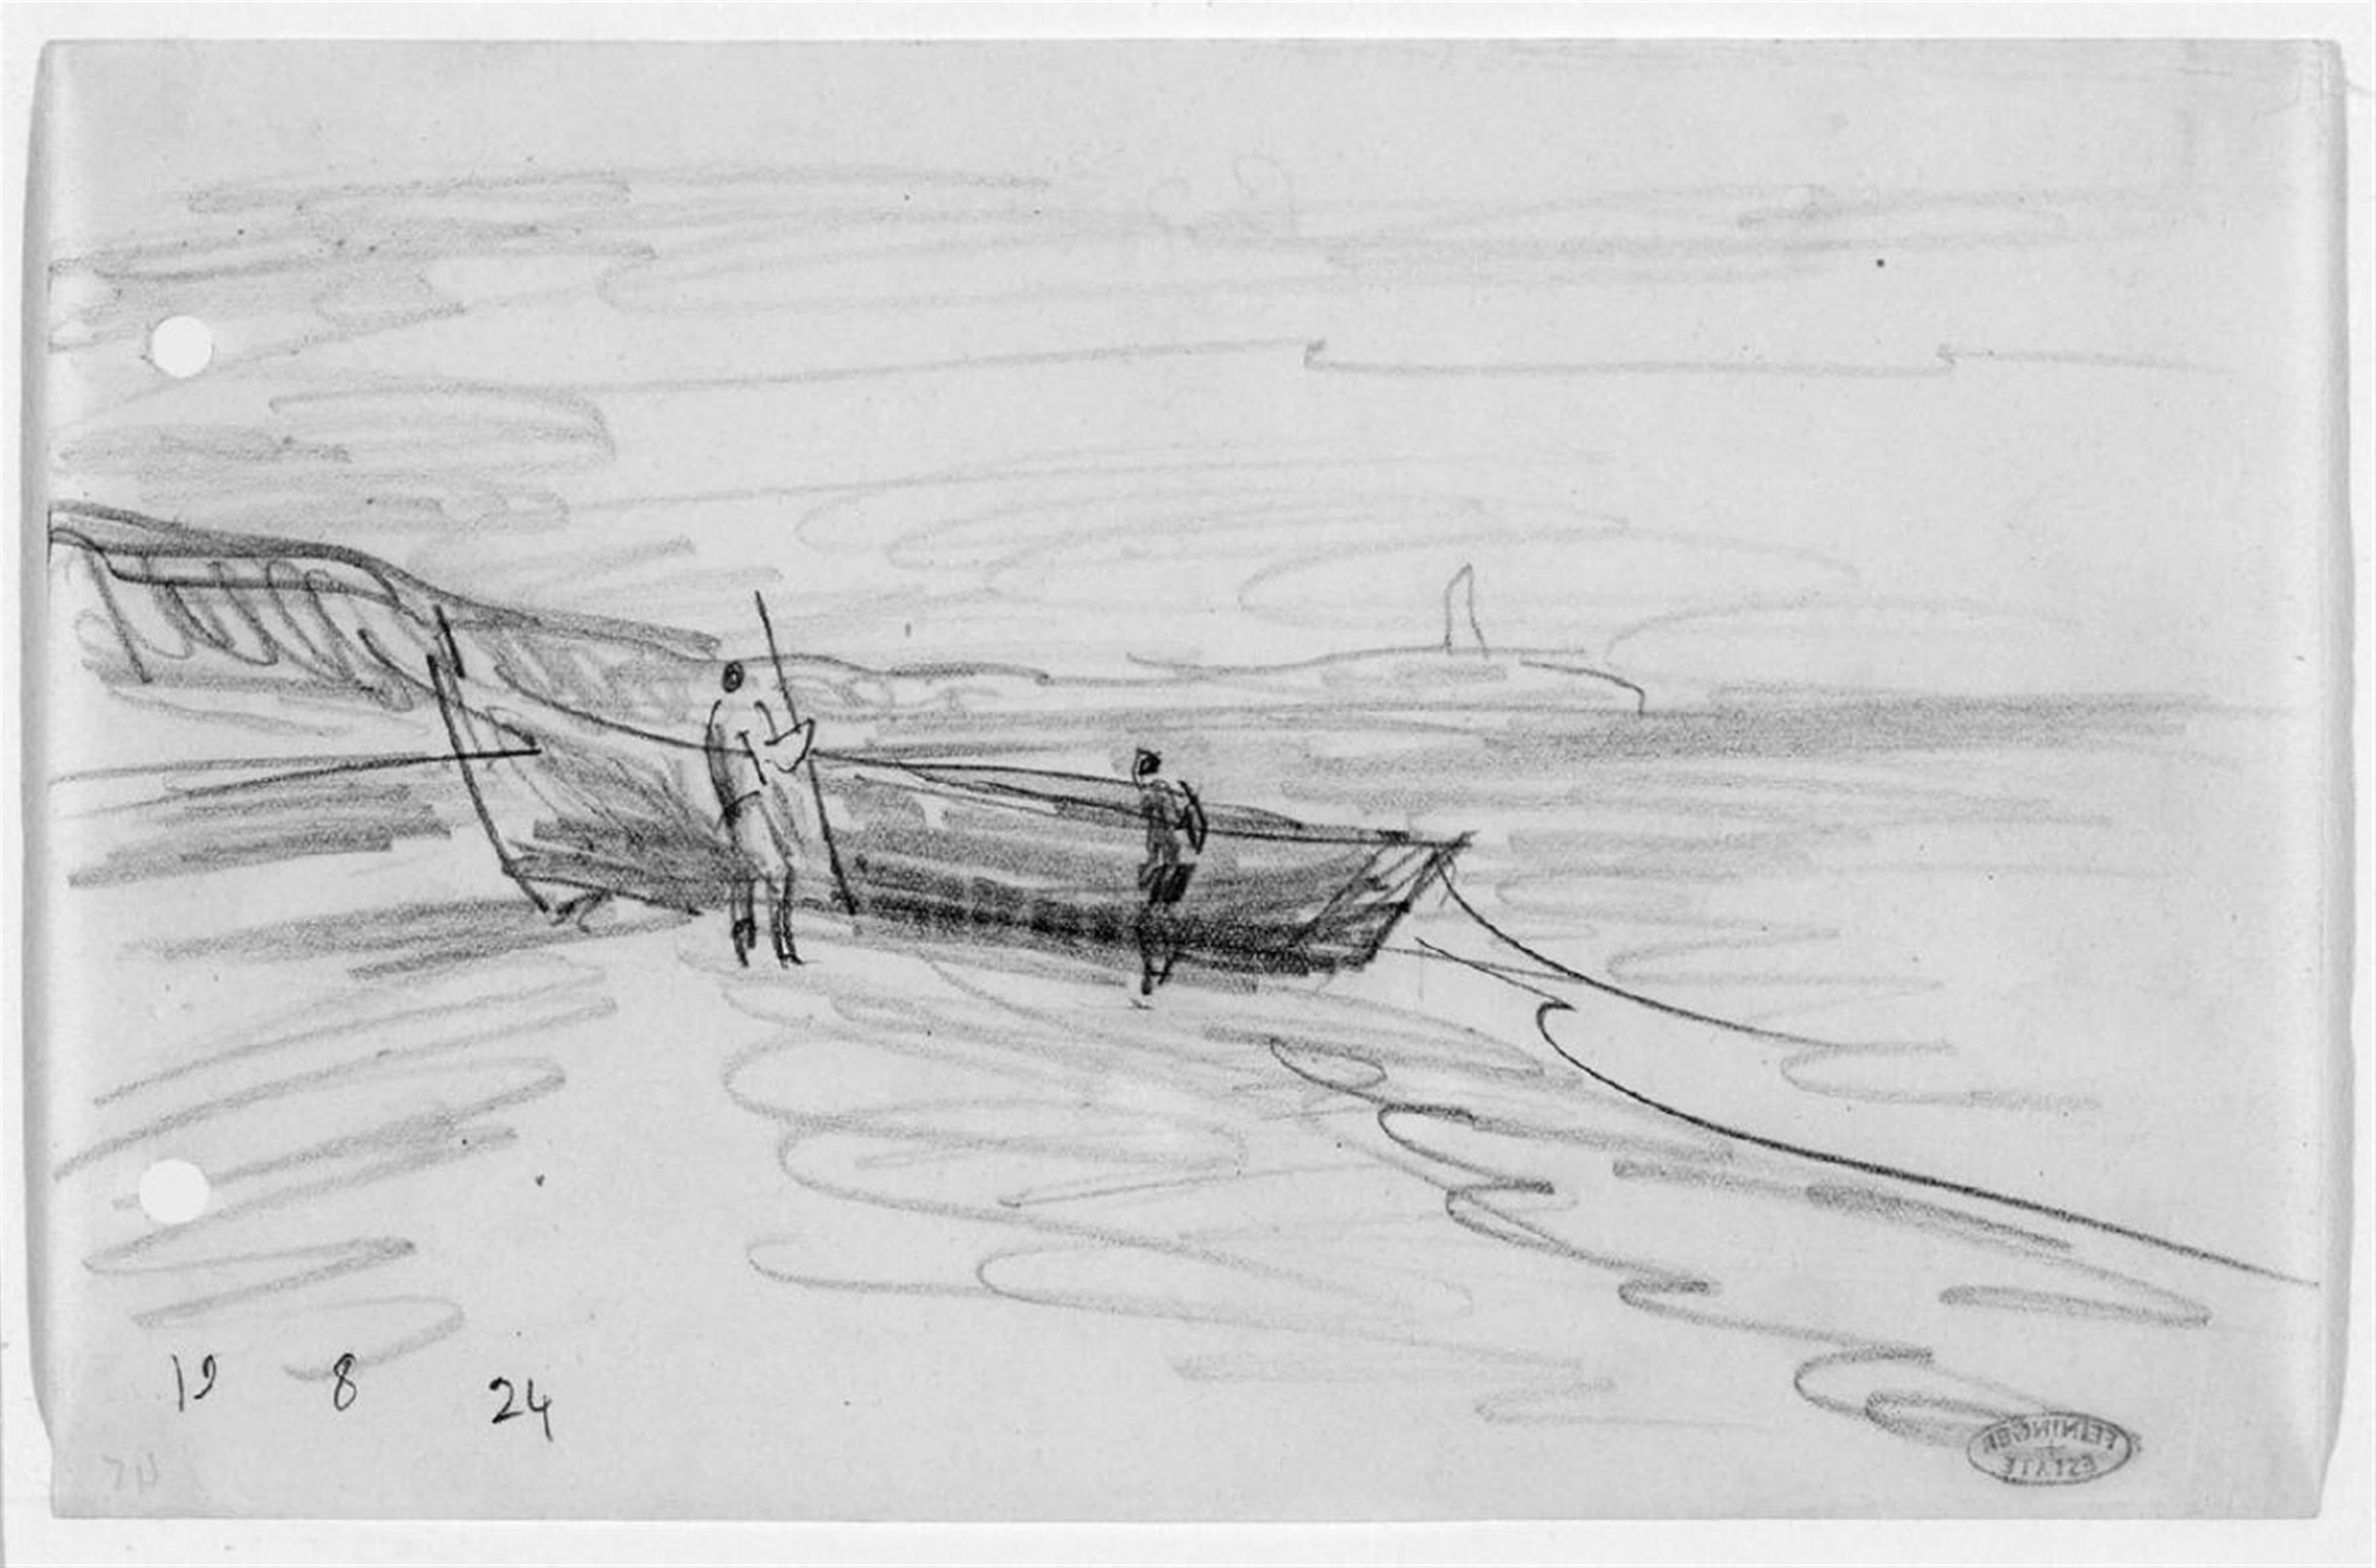 Lyonel Feininger - 2 Figures by Rowing Boat pulled up on Beach, Lighthouse in the Distance (Baltische Küste bei Deep) - image-1